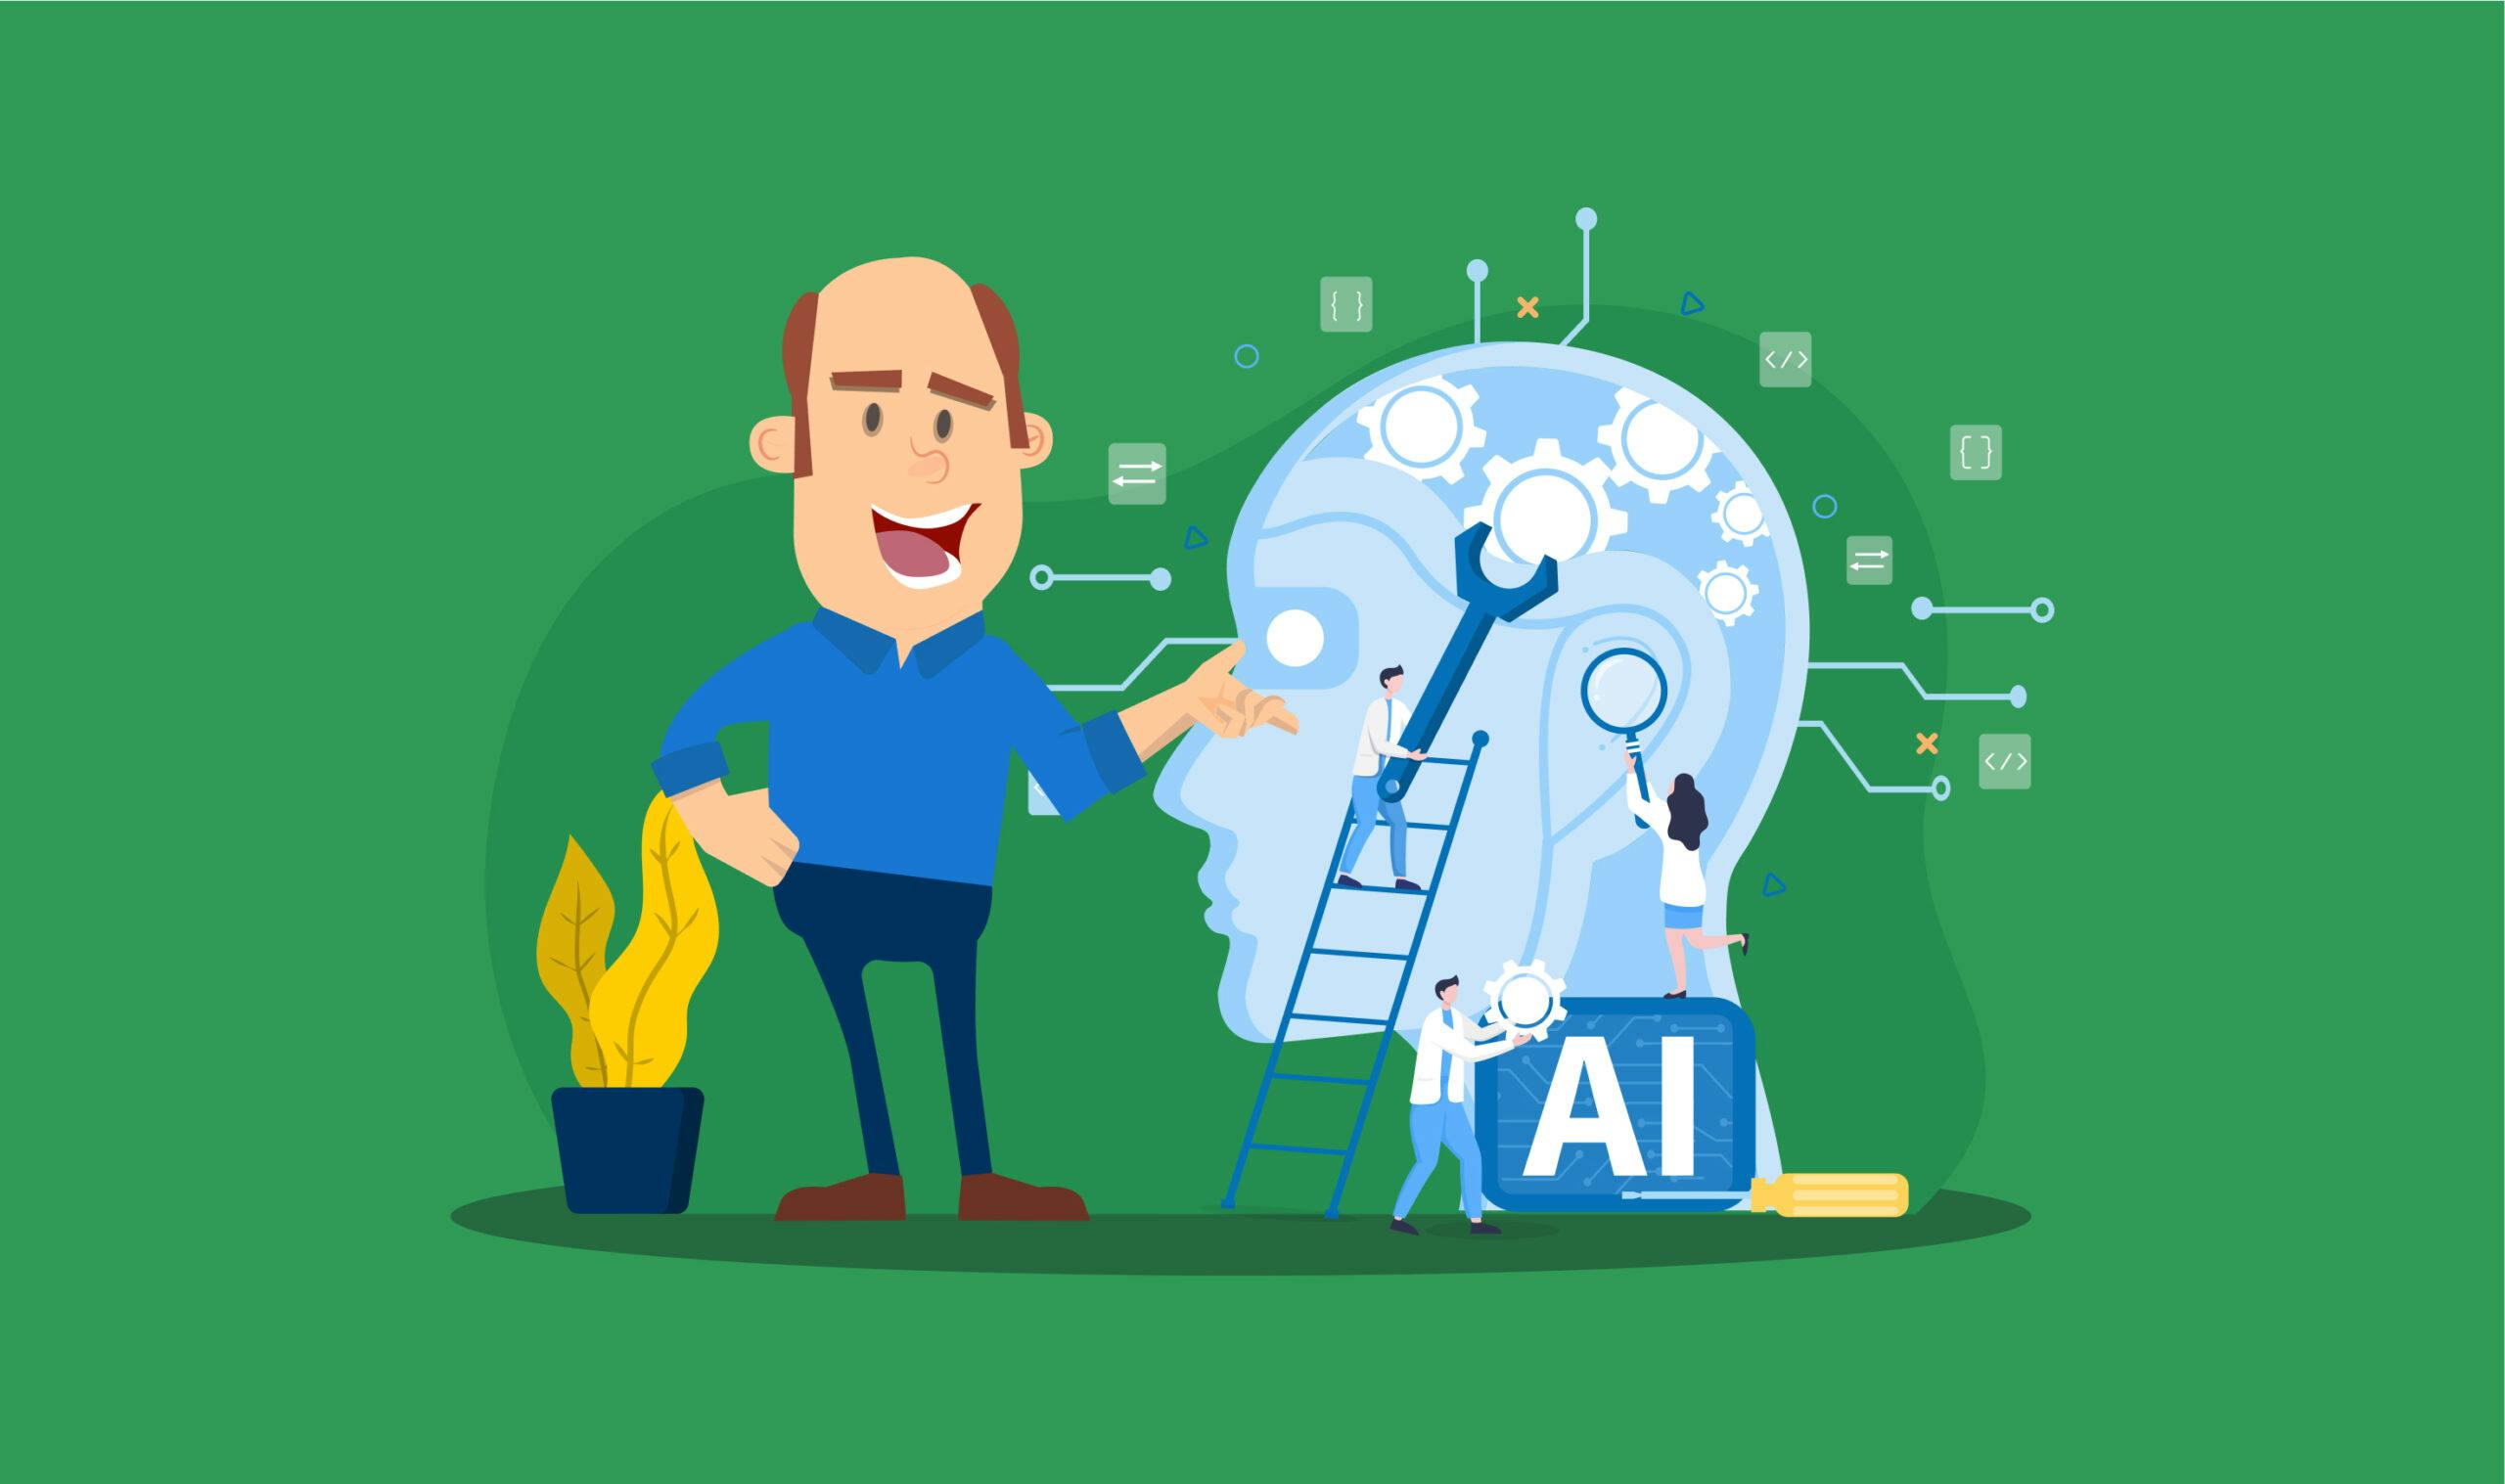 AI in accounting